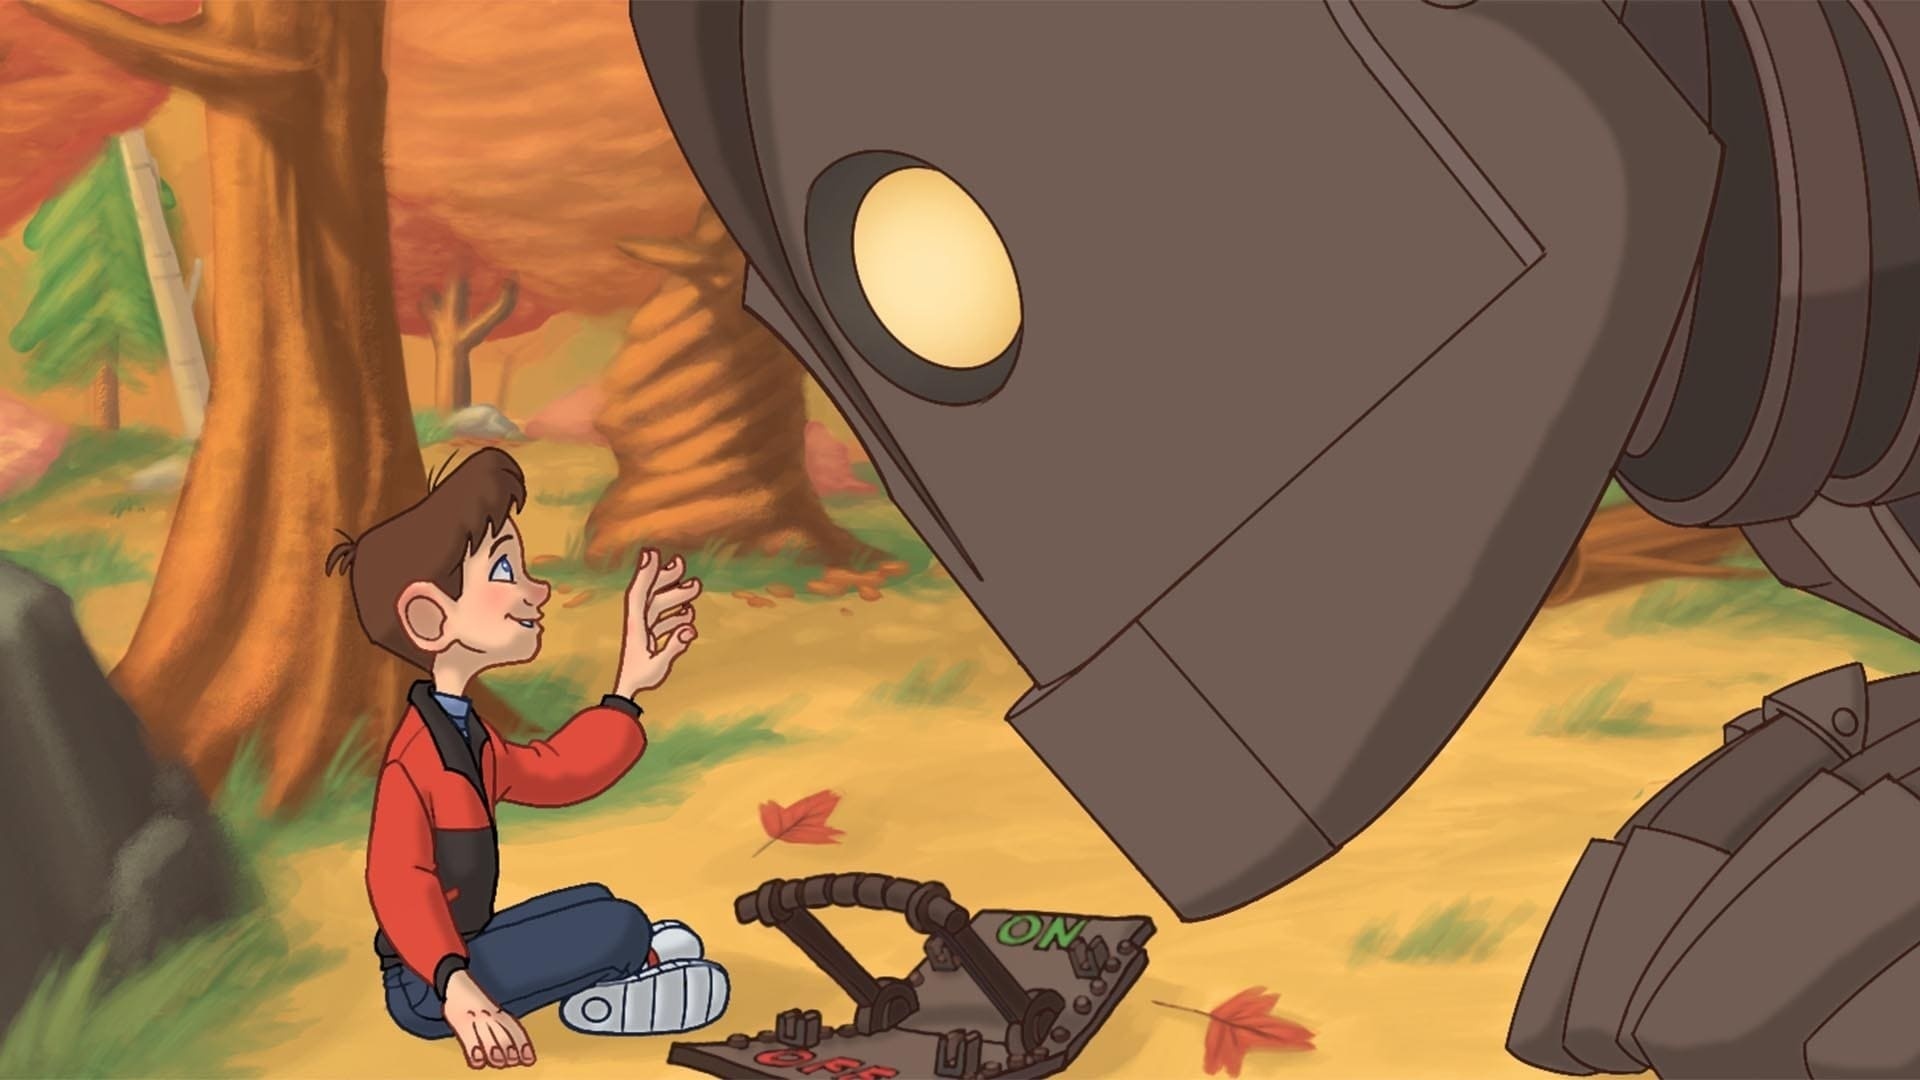 Iron Giant backdrops, Movie database images, Iconic scenes, Visual reference, 1920x1080 Full HD Desktop